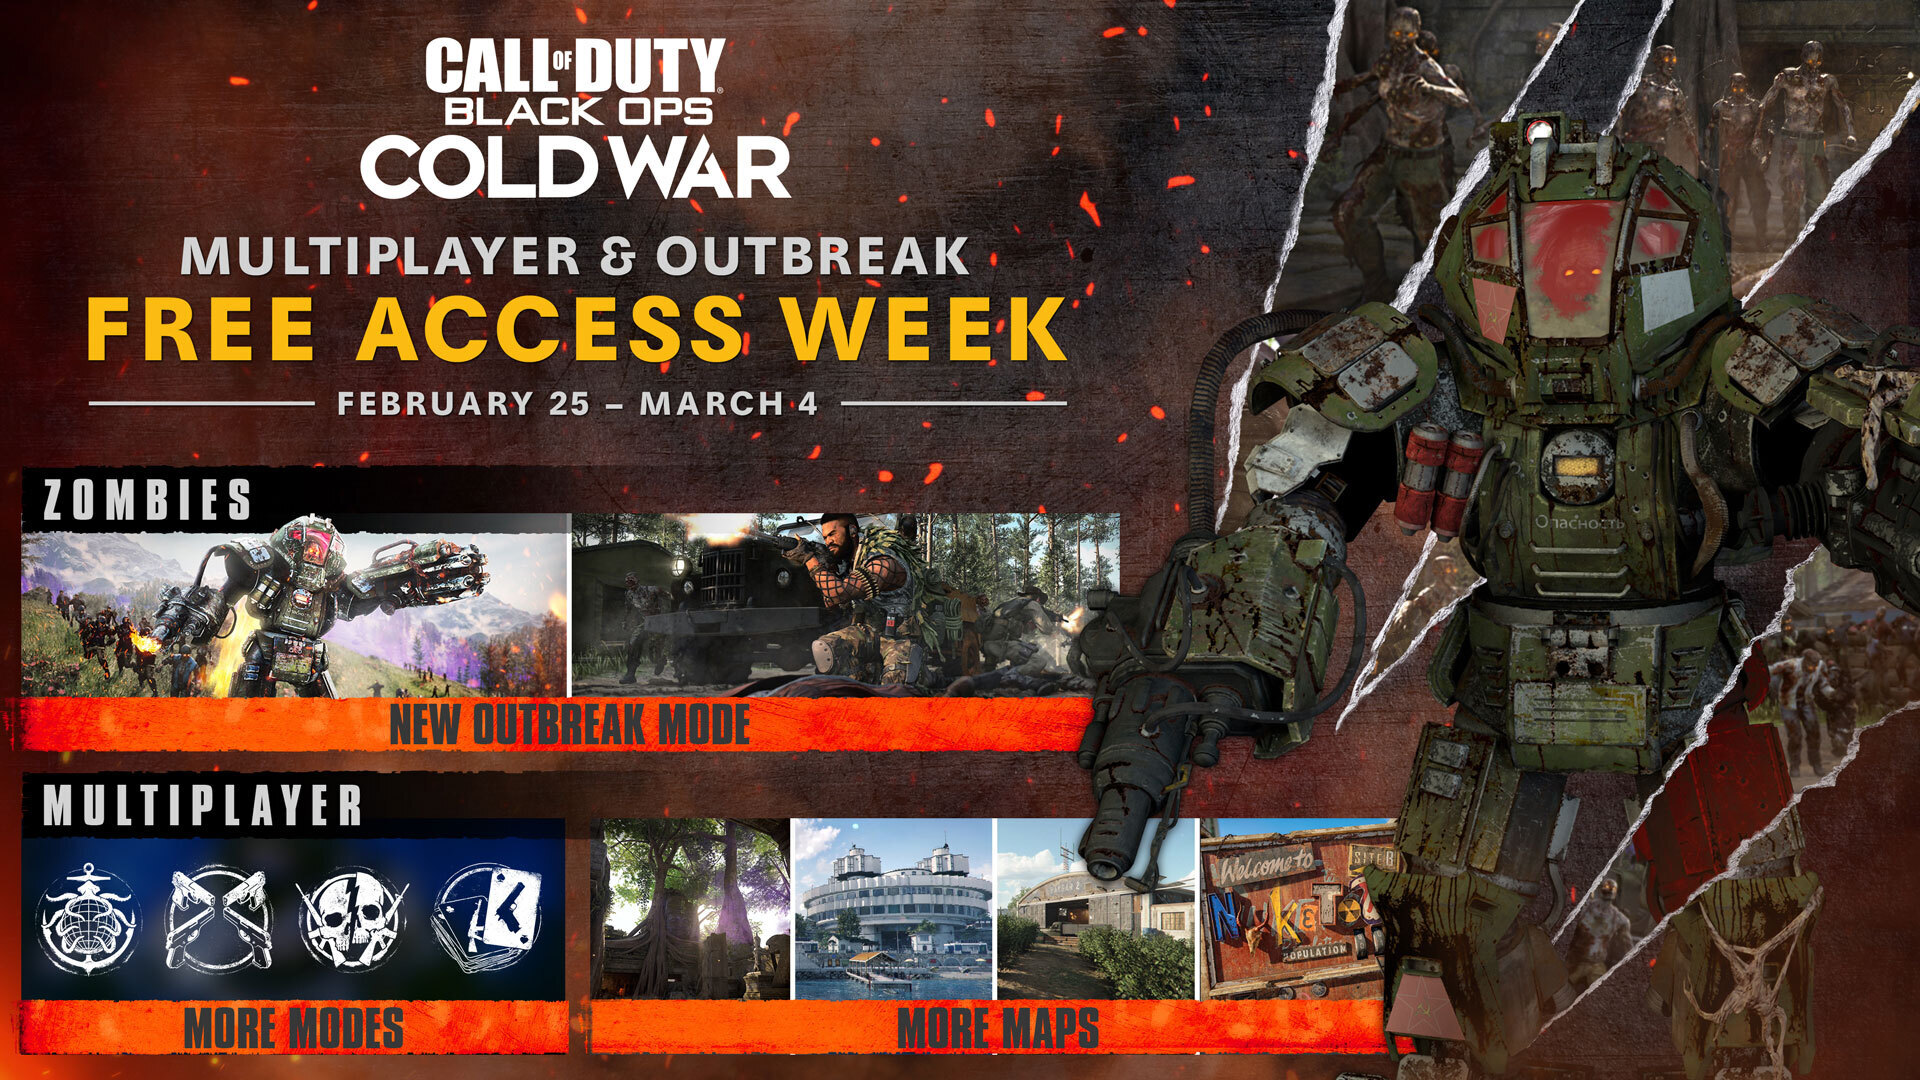 Experience Outbreak and Multiplayer for Free in Call of Duty Black Ops Cold War